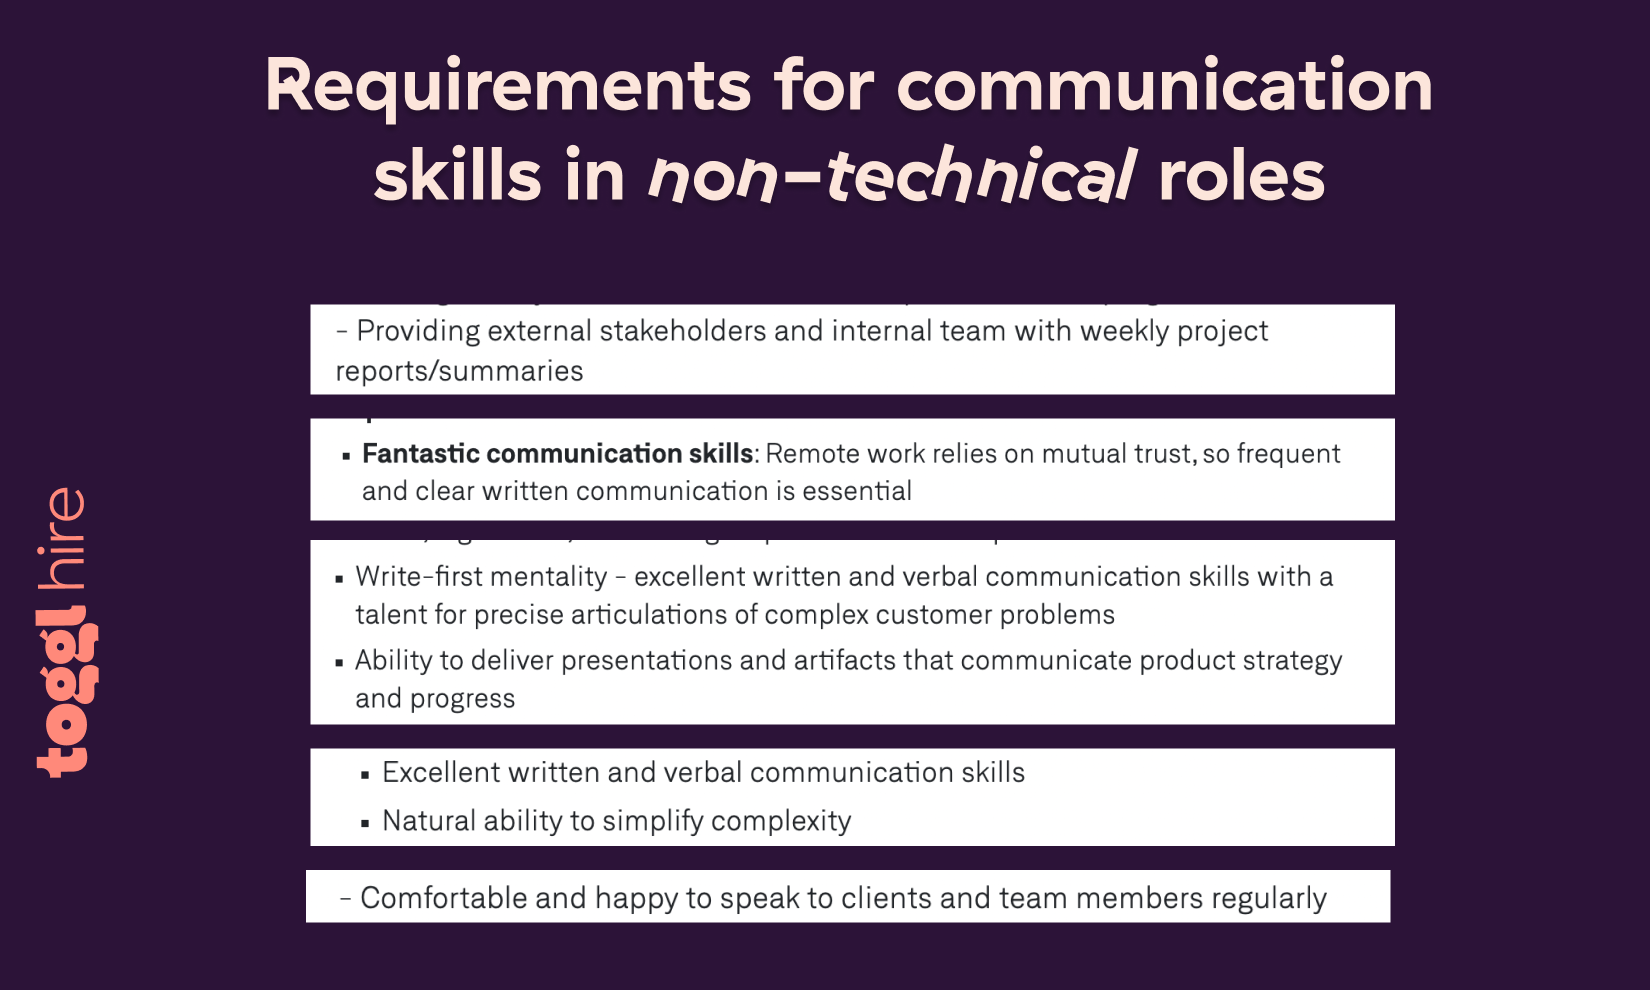 Almost every job description out there requires communication skills – from design to marketing to product management. 